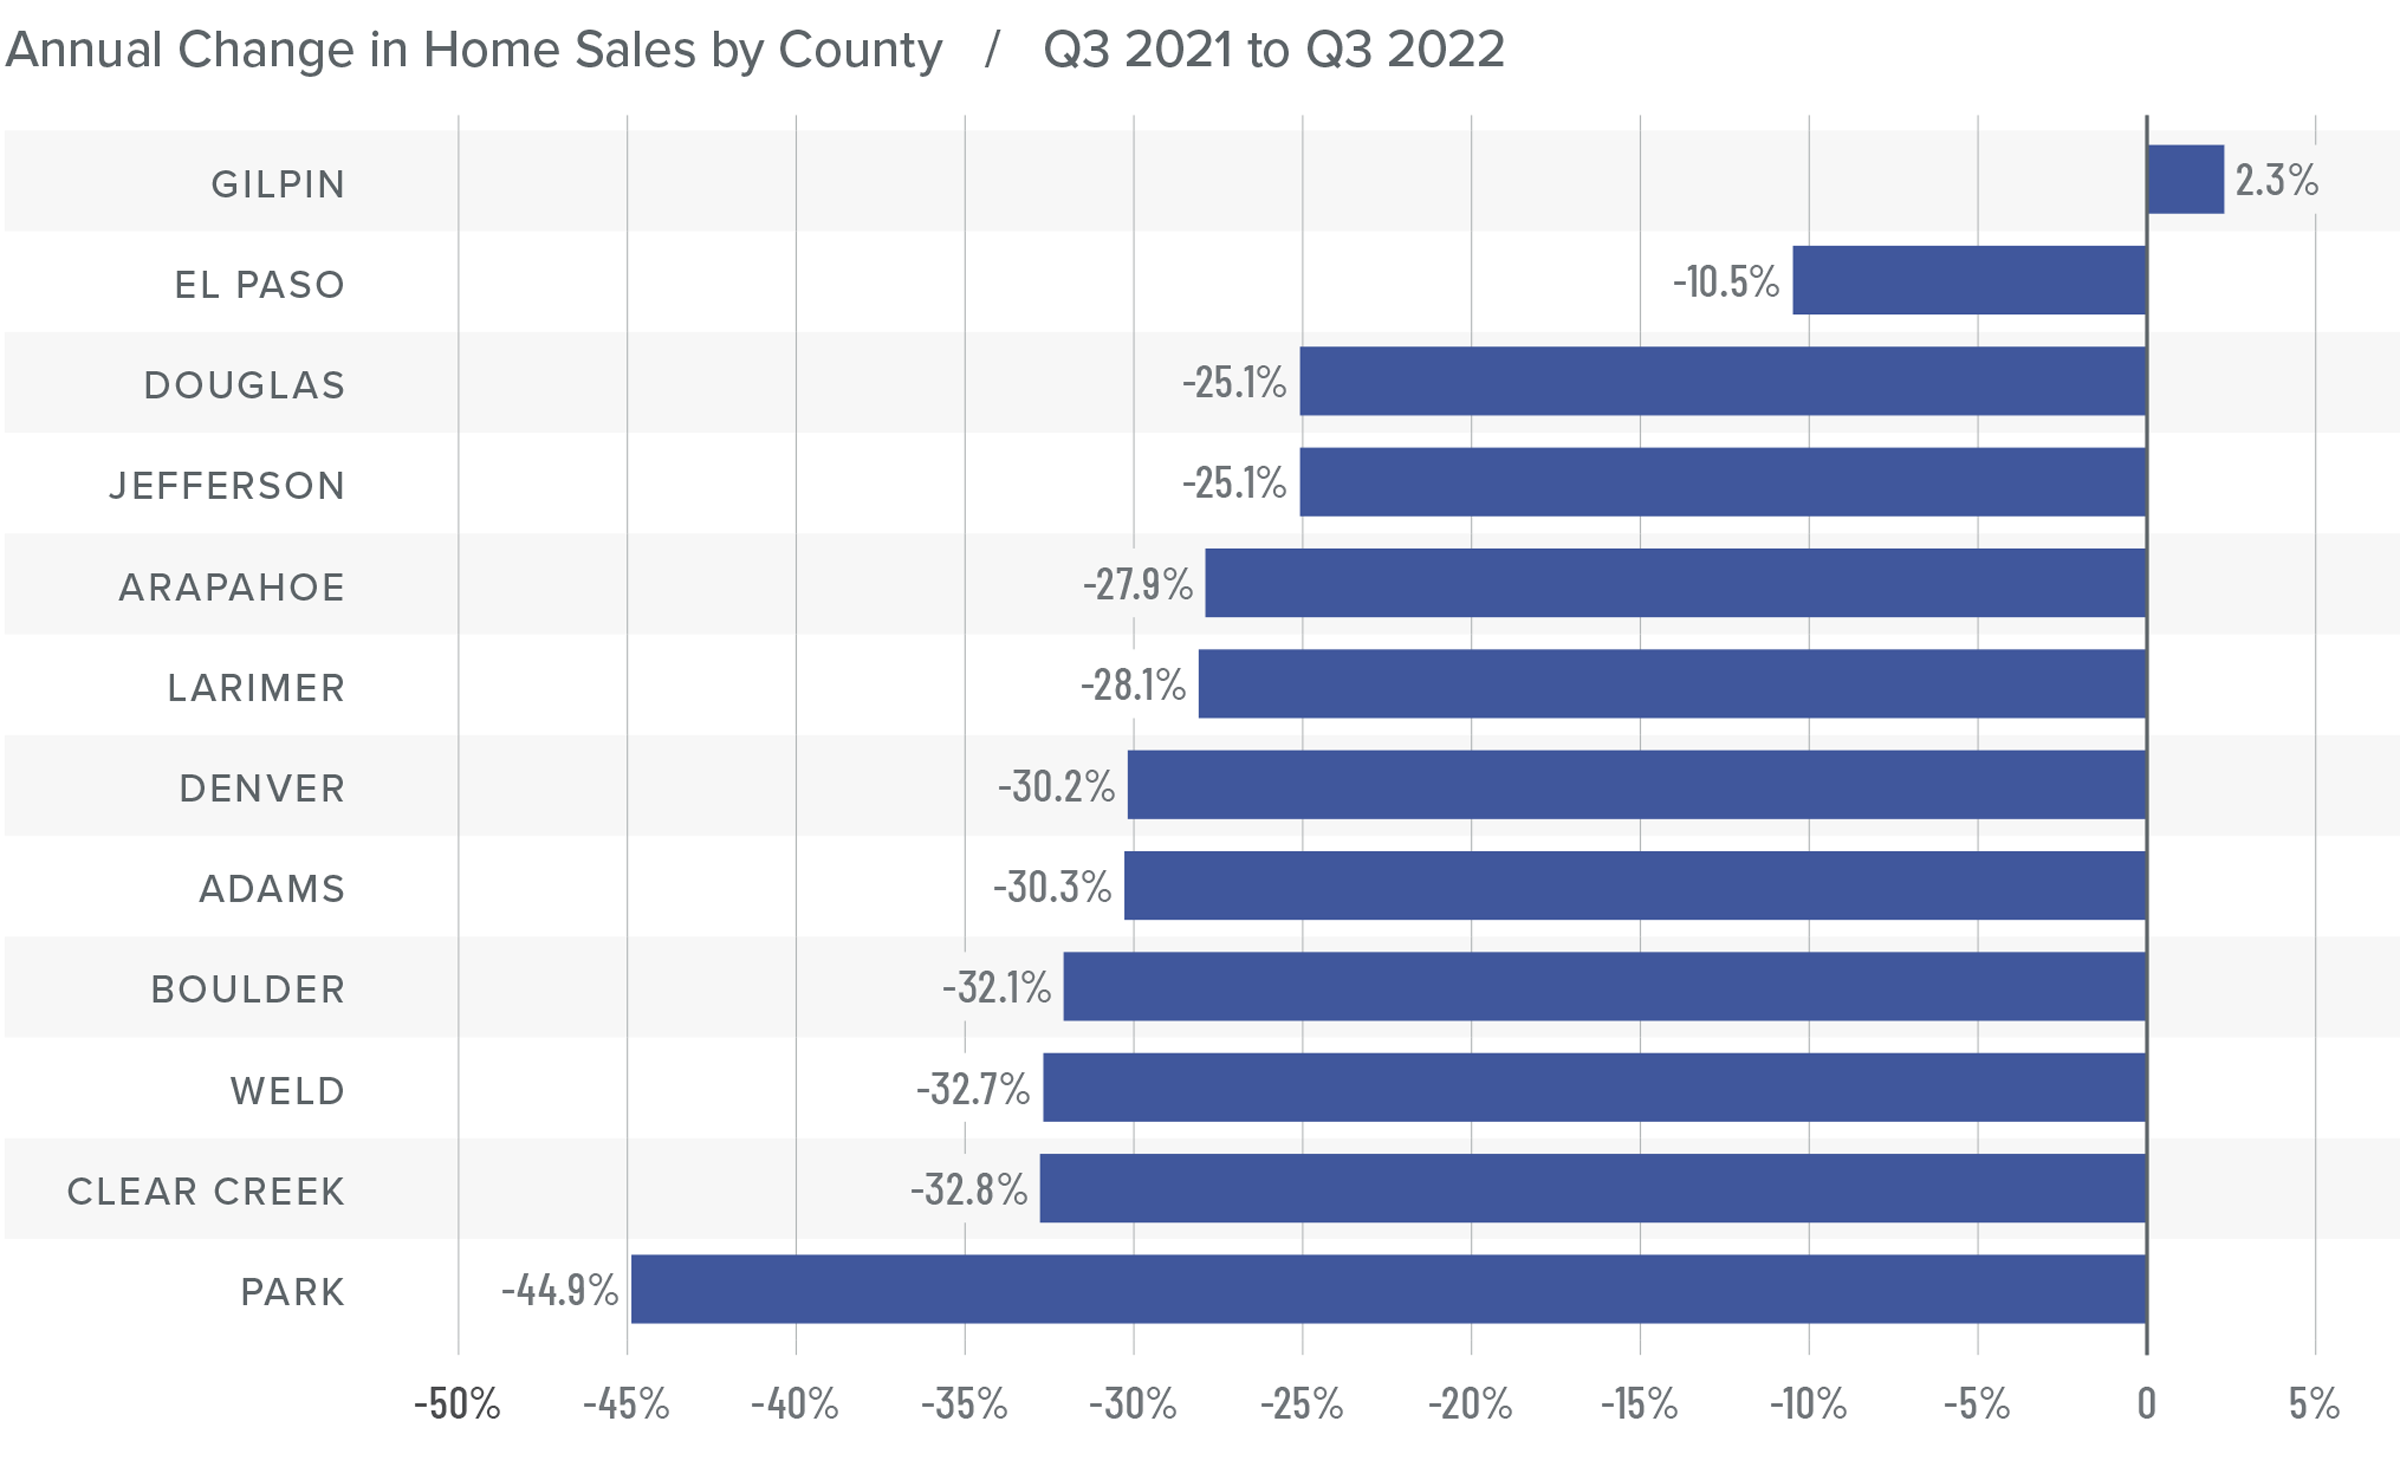 A bar graph showing the annual change in home sales for various counties in Colorado from Q3 2021 to Q3 2022. All counties have a negative percentage year-over-year change except Gilpin County, which has a 2.3% change. Gilpin is followed by El Paso at -10.5%, Douglas and Jefferson -25.1%, Arapahoe -27.9%, Larimer -28.1%, Denver -30.2%, Adams -30.3%, Boulder -32.1%, Weld -32.7%, Clear Creek -32.8%, and Park at -44.9%.